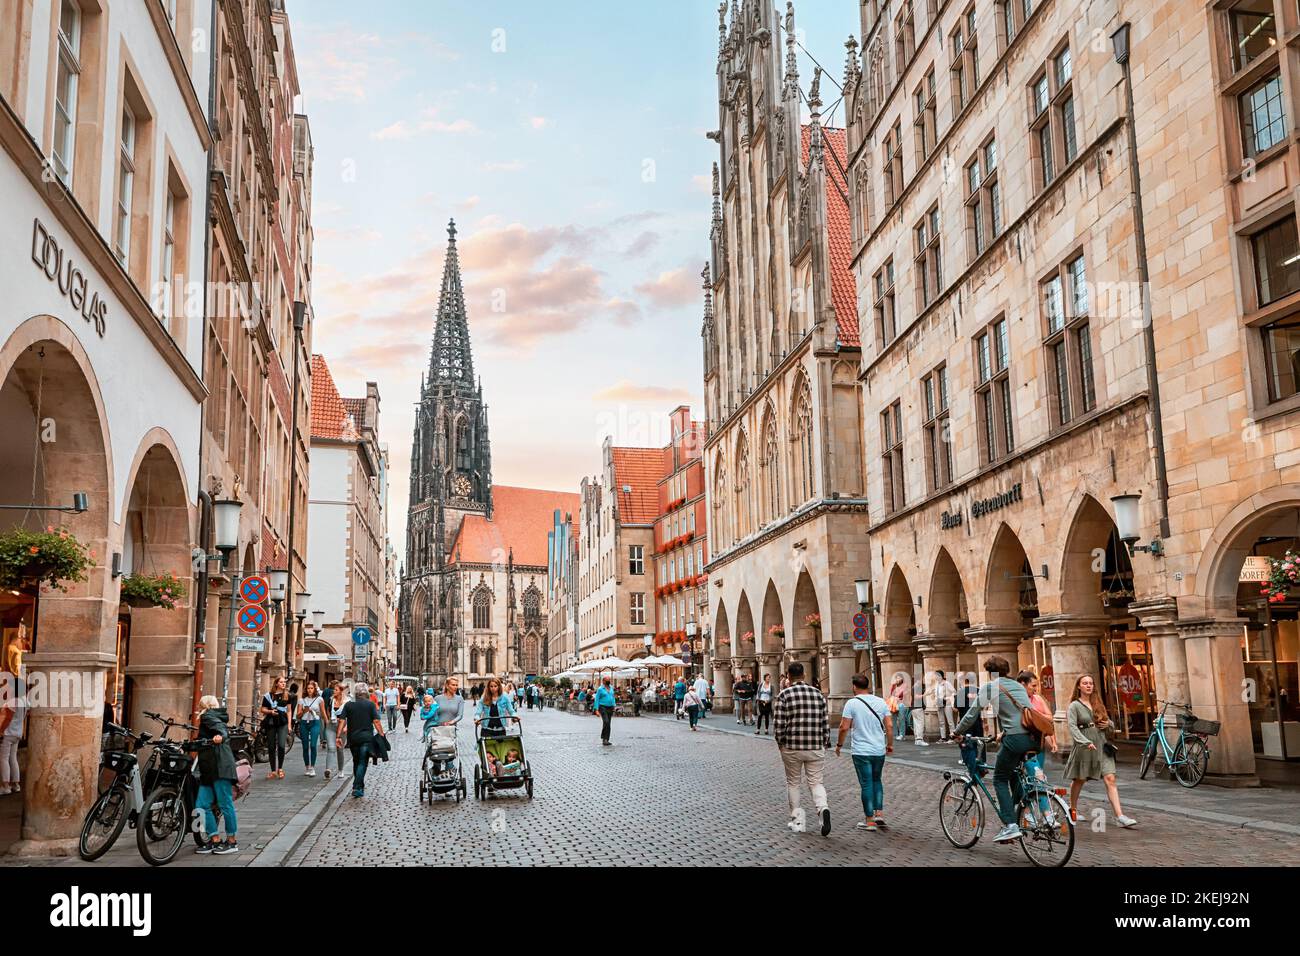 26 July 2022, Munster, Germany: Prinzipalmarkt - crowds of tourists at famous shopping street and tourist attraction. Saint Lamberti Tower at backgrou Stock Photo